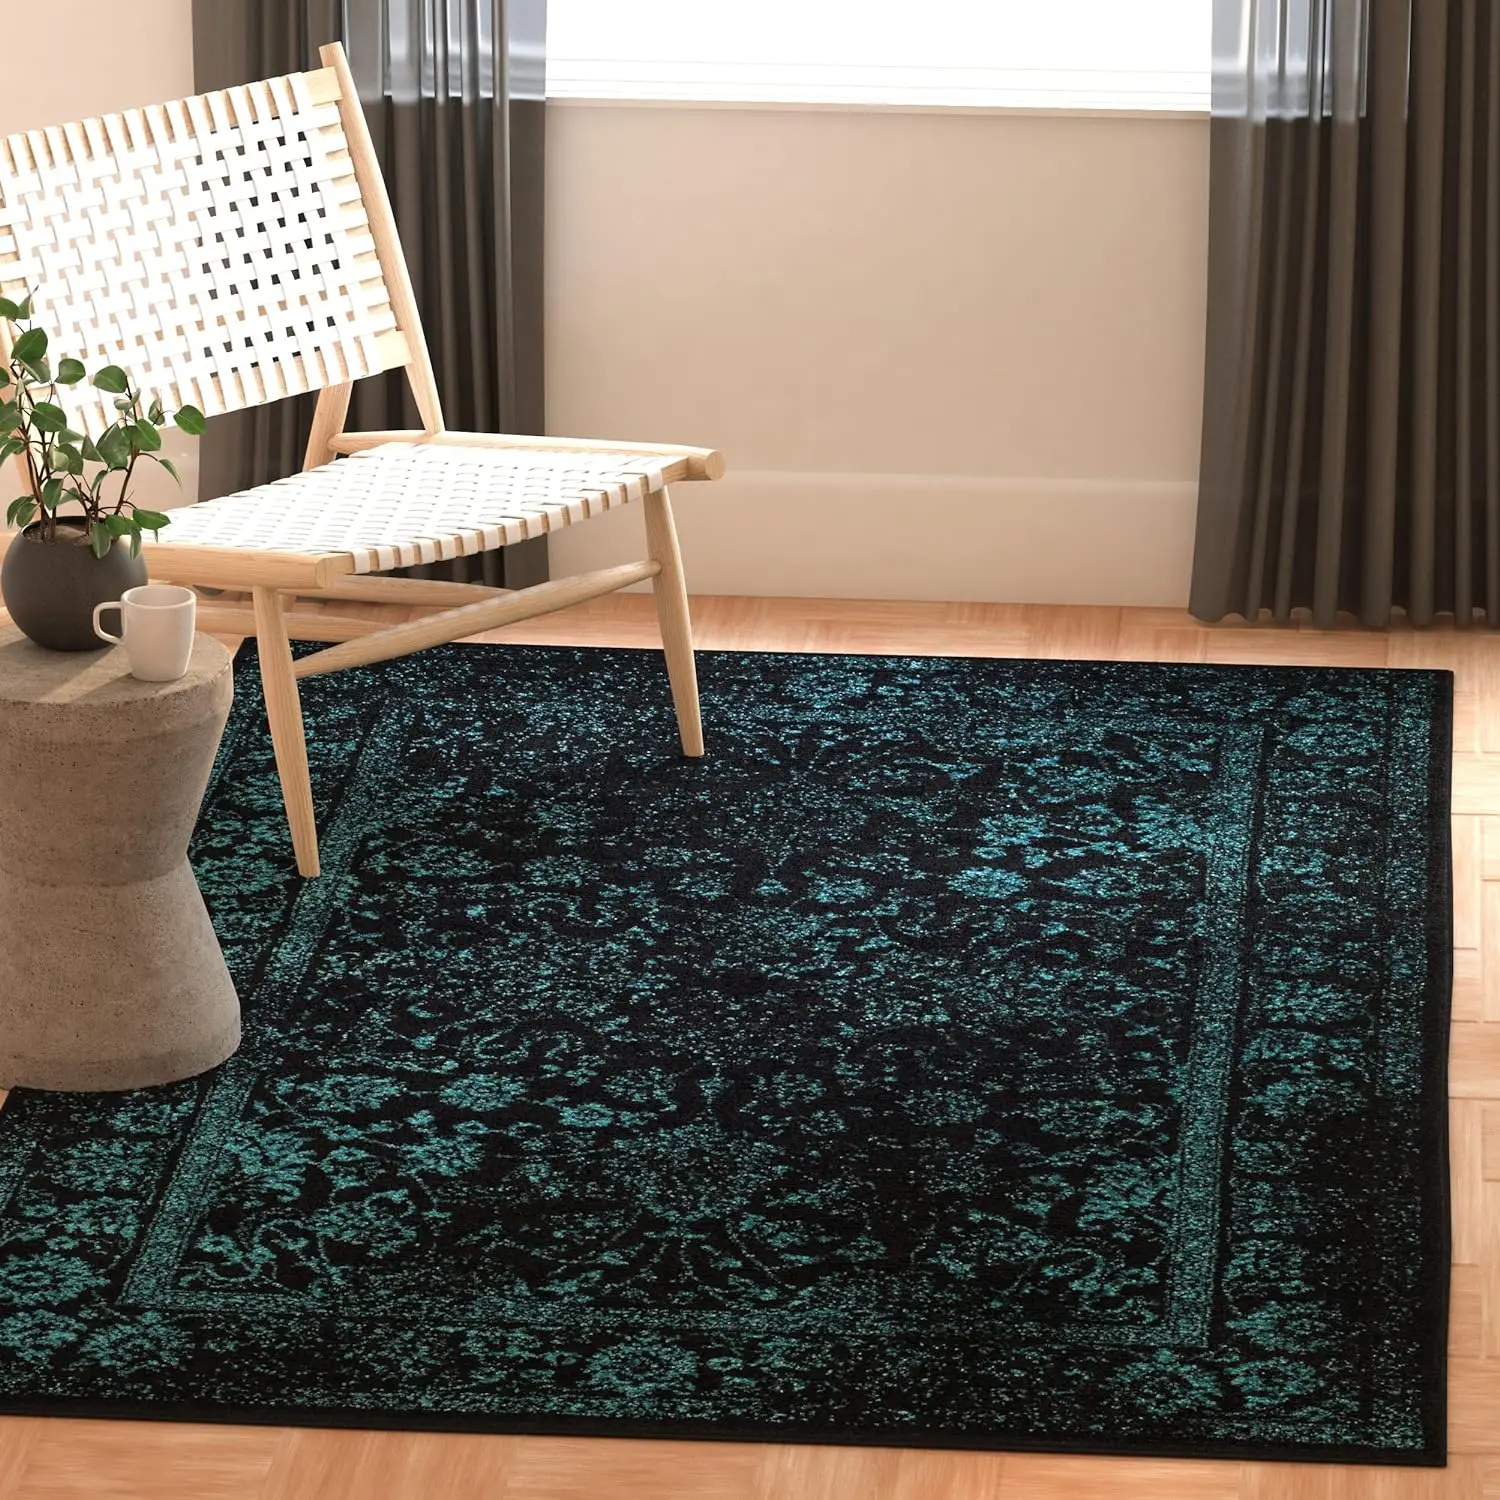 

Safavieh Adirondack Collection Area Rug - 10' x 14', Black & Teal, Oriental Distressed Design, Non-Shedding & Easy Care, Ideal f